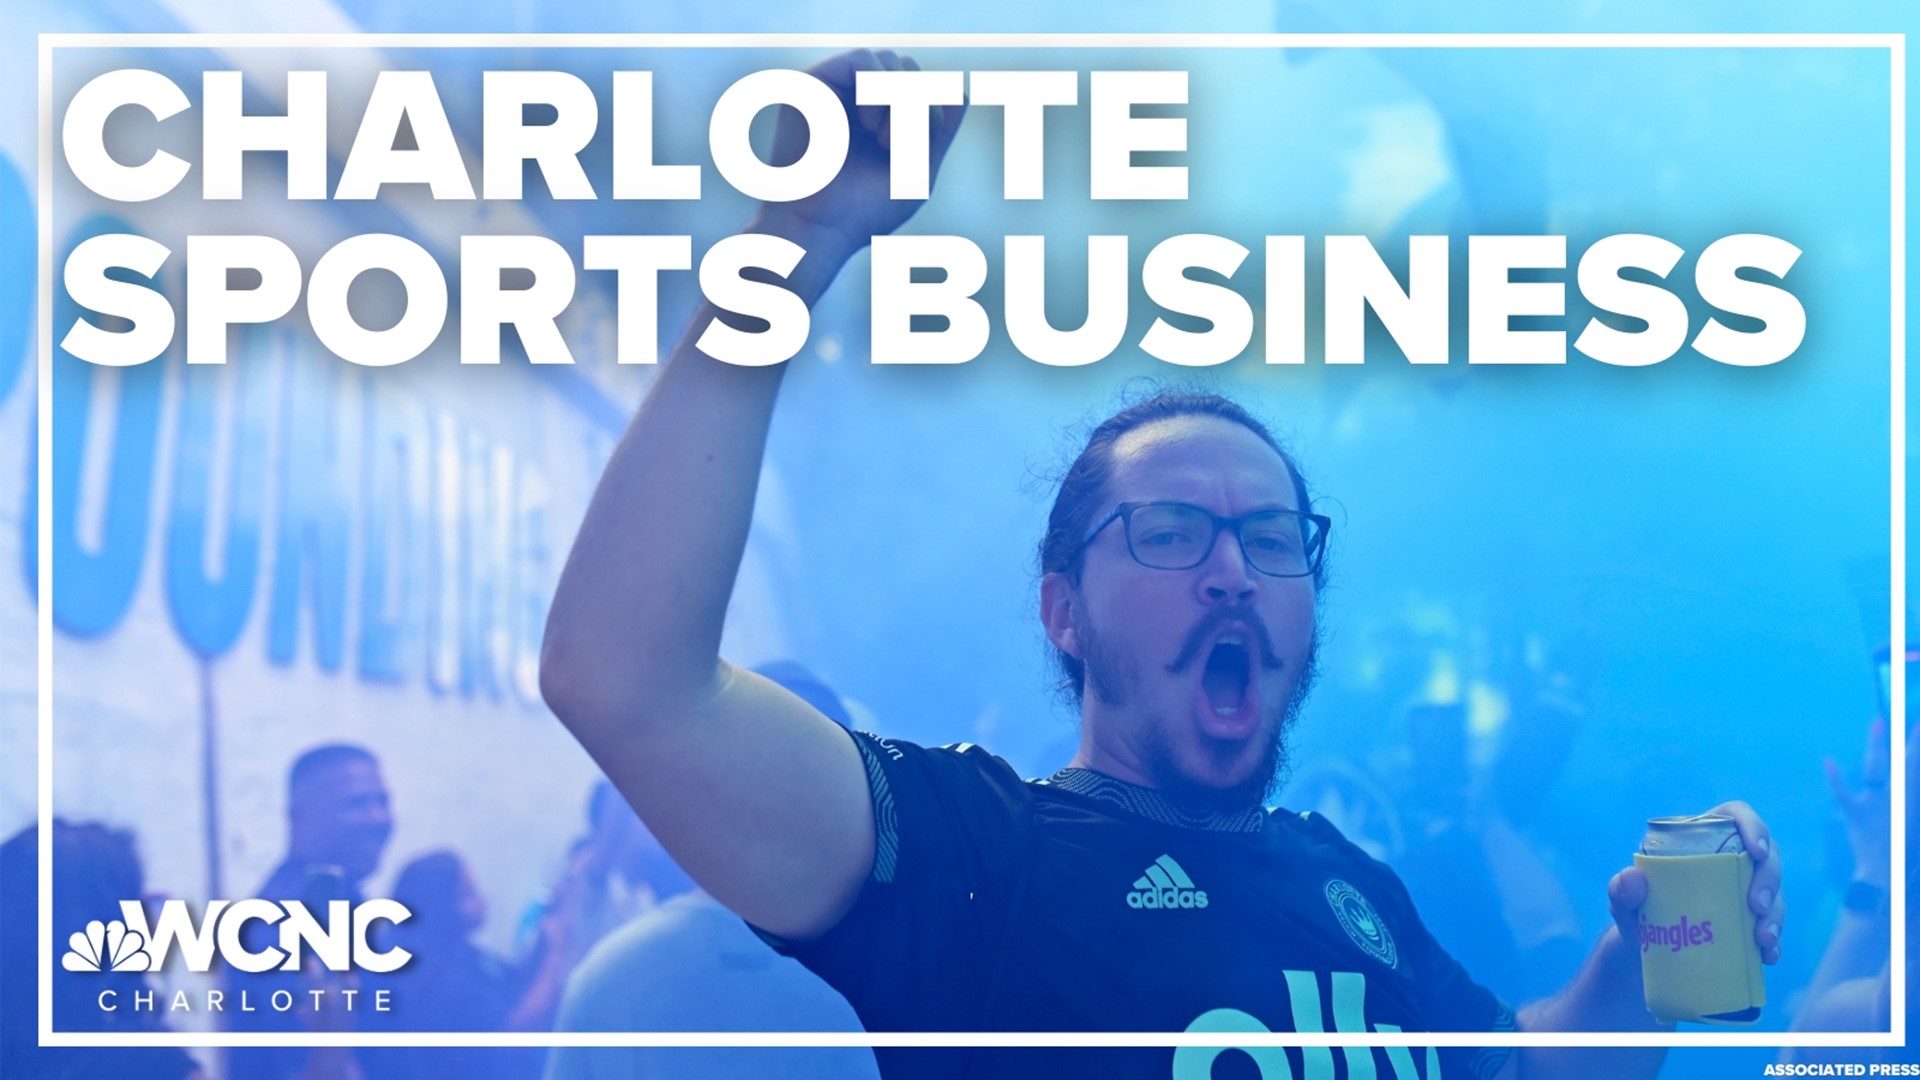 The Sports Business Journal ranked Charlotte at No. 3.